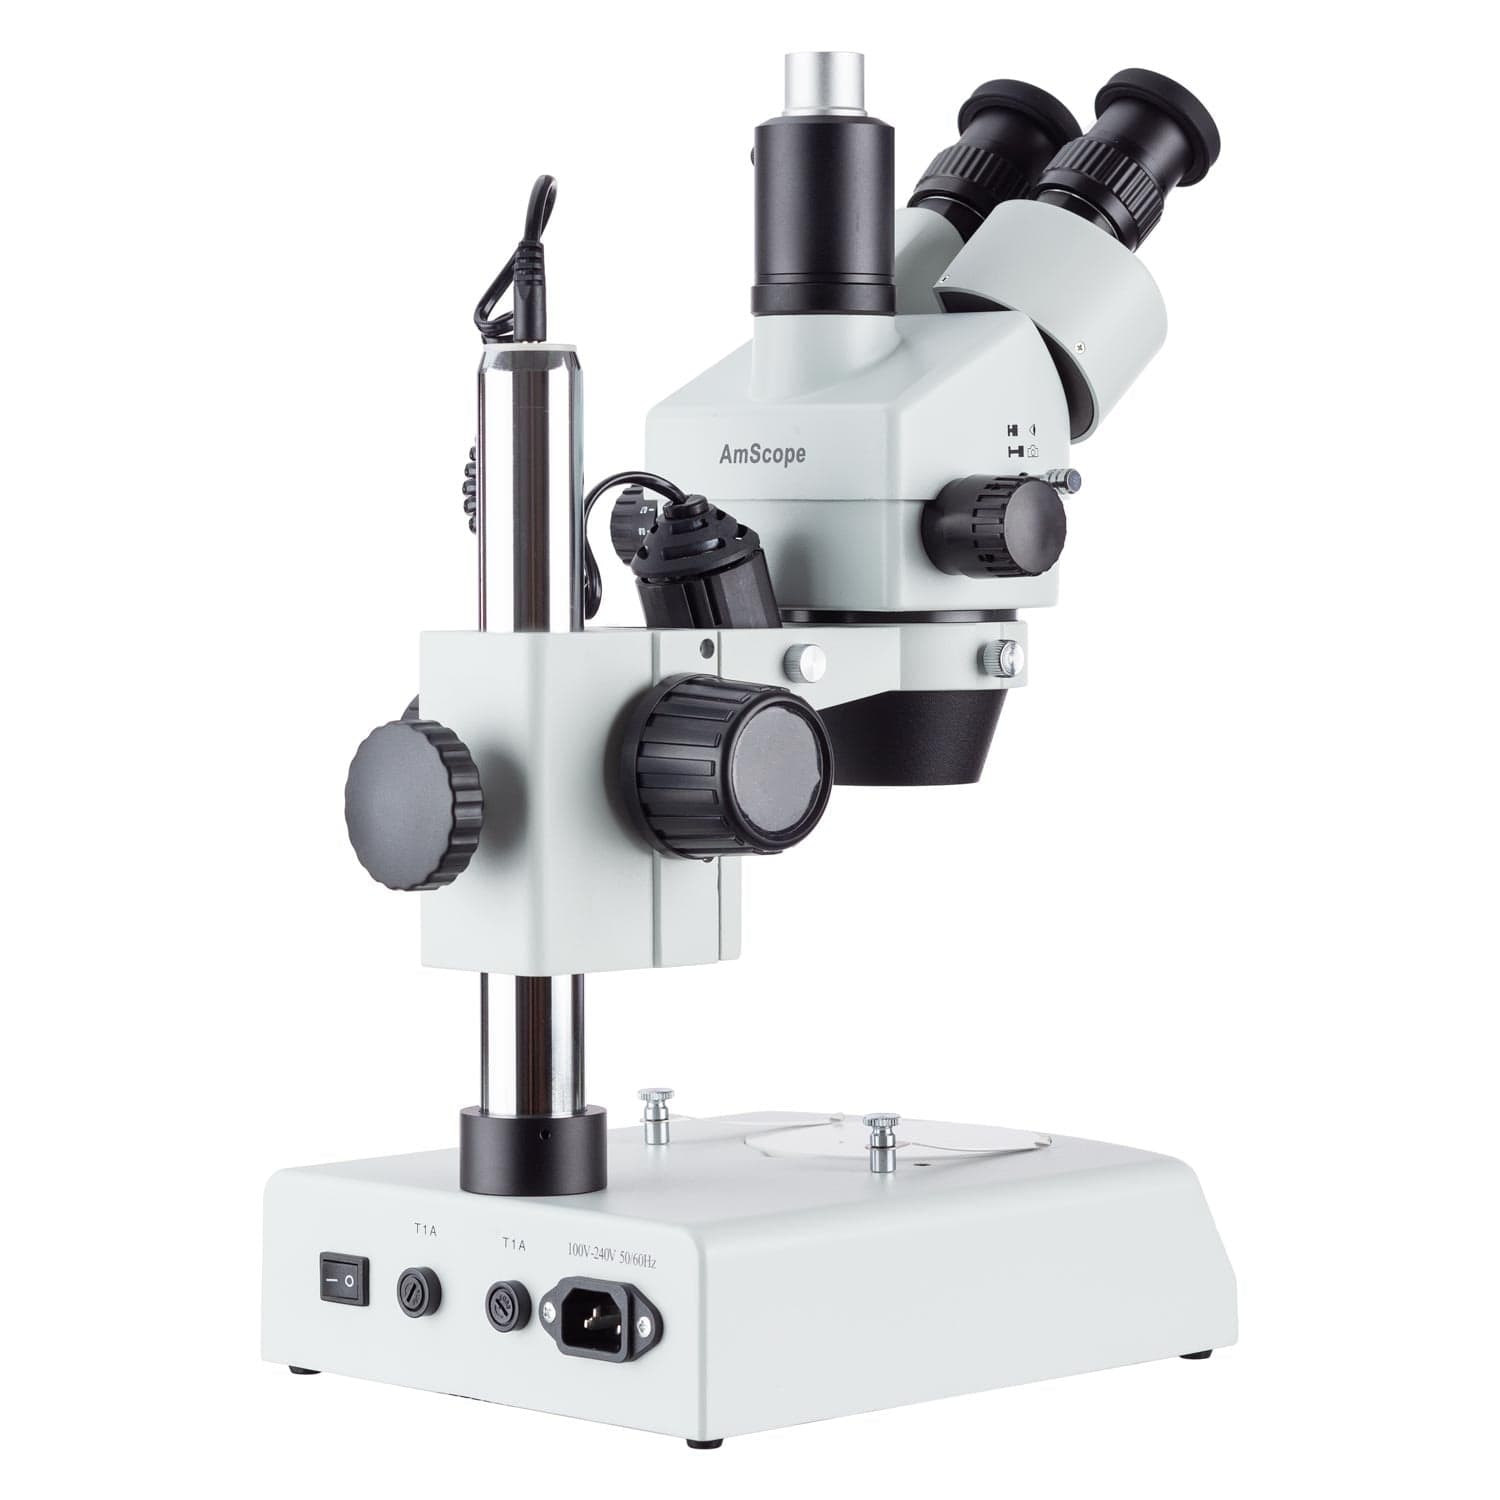 AmScope, Amscope SM-2T-LED-TP 7X - 45X LED Trinocular Zoom Stereo Microscope with Touchpad Digital Imaging System New